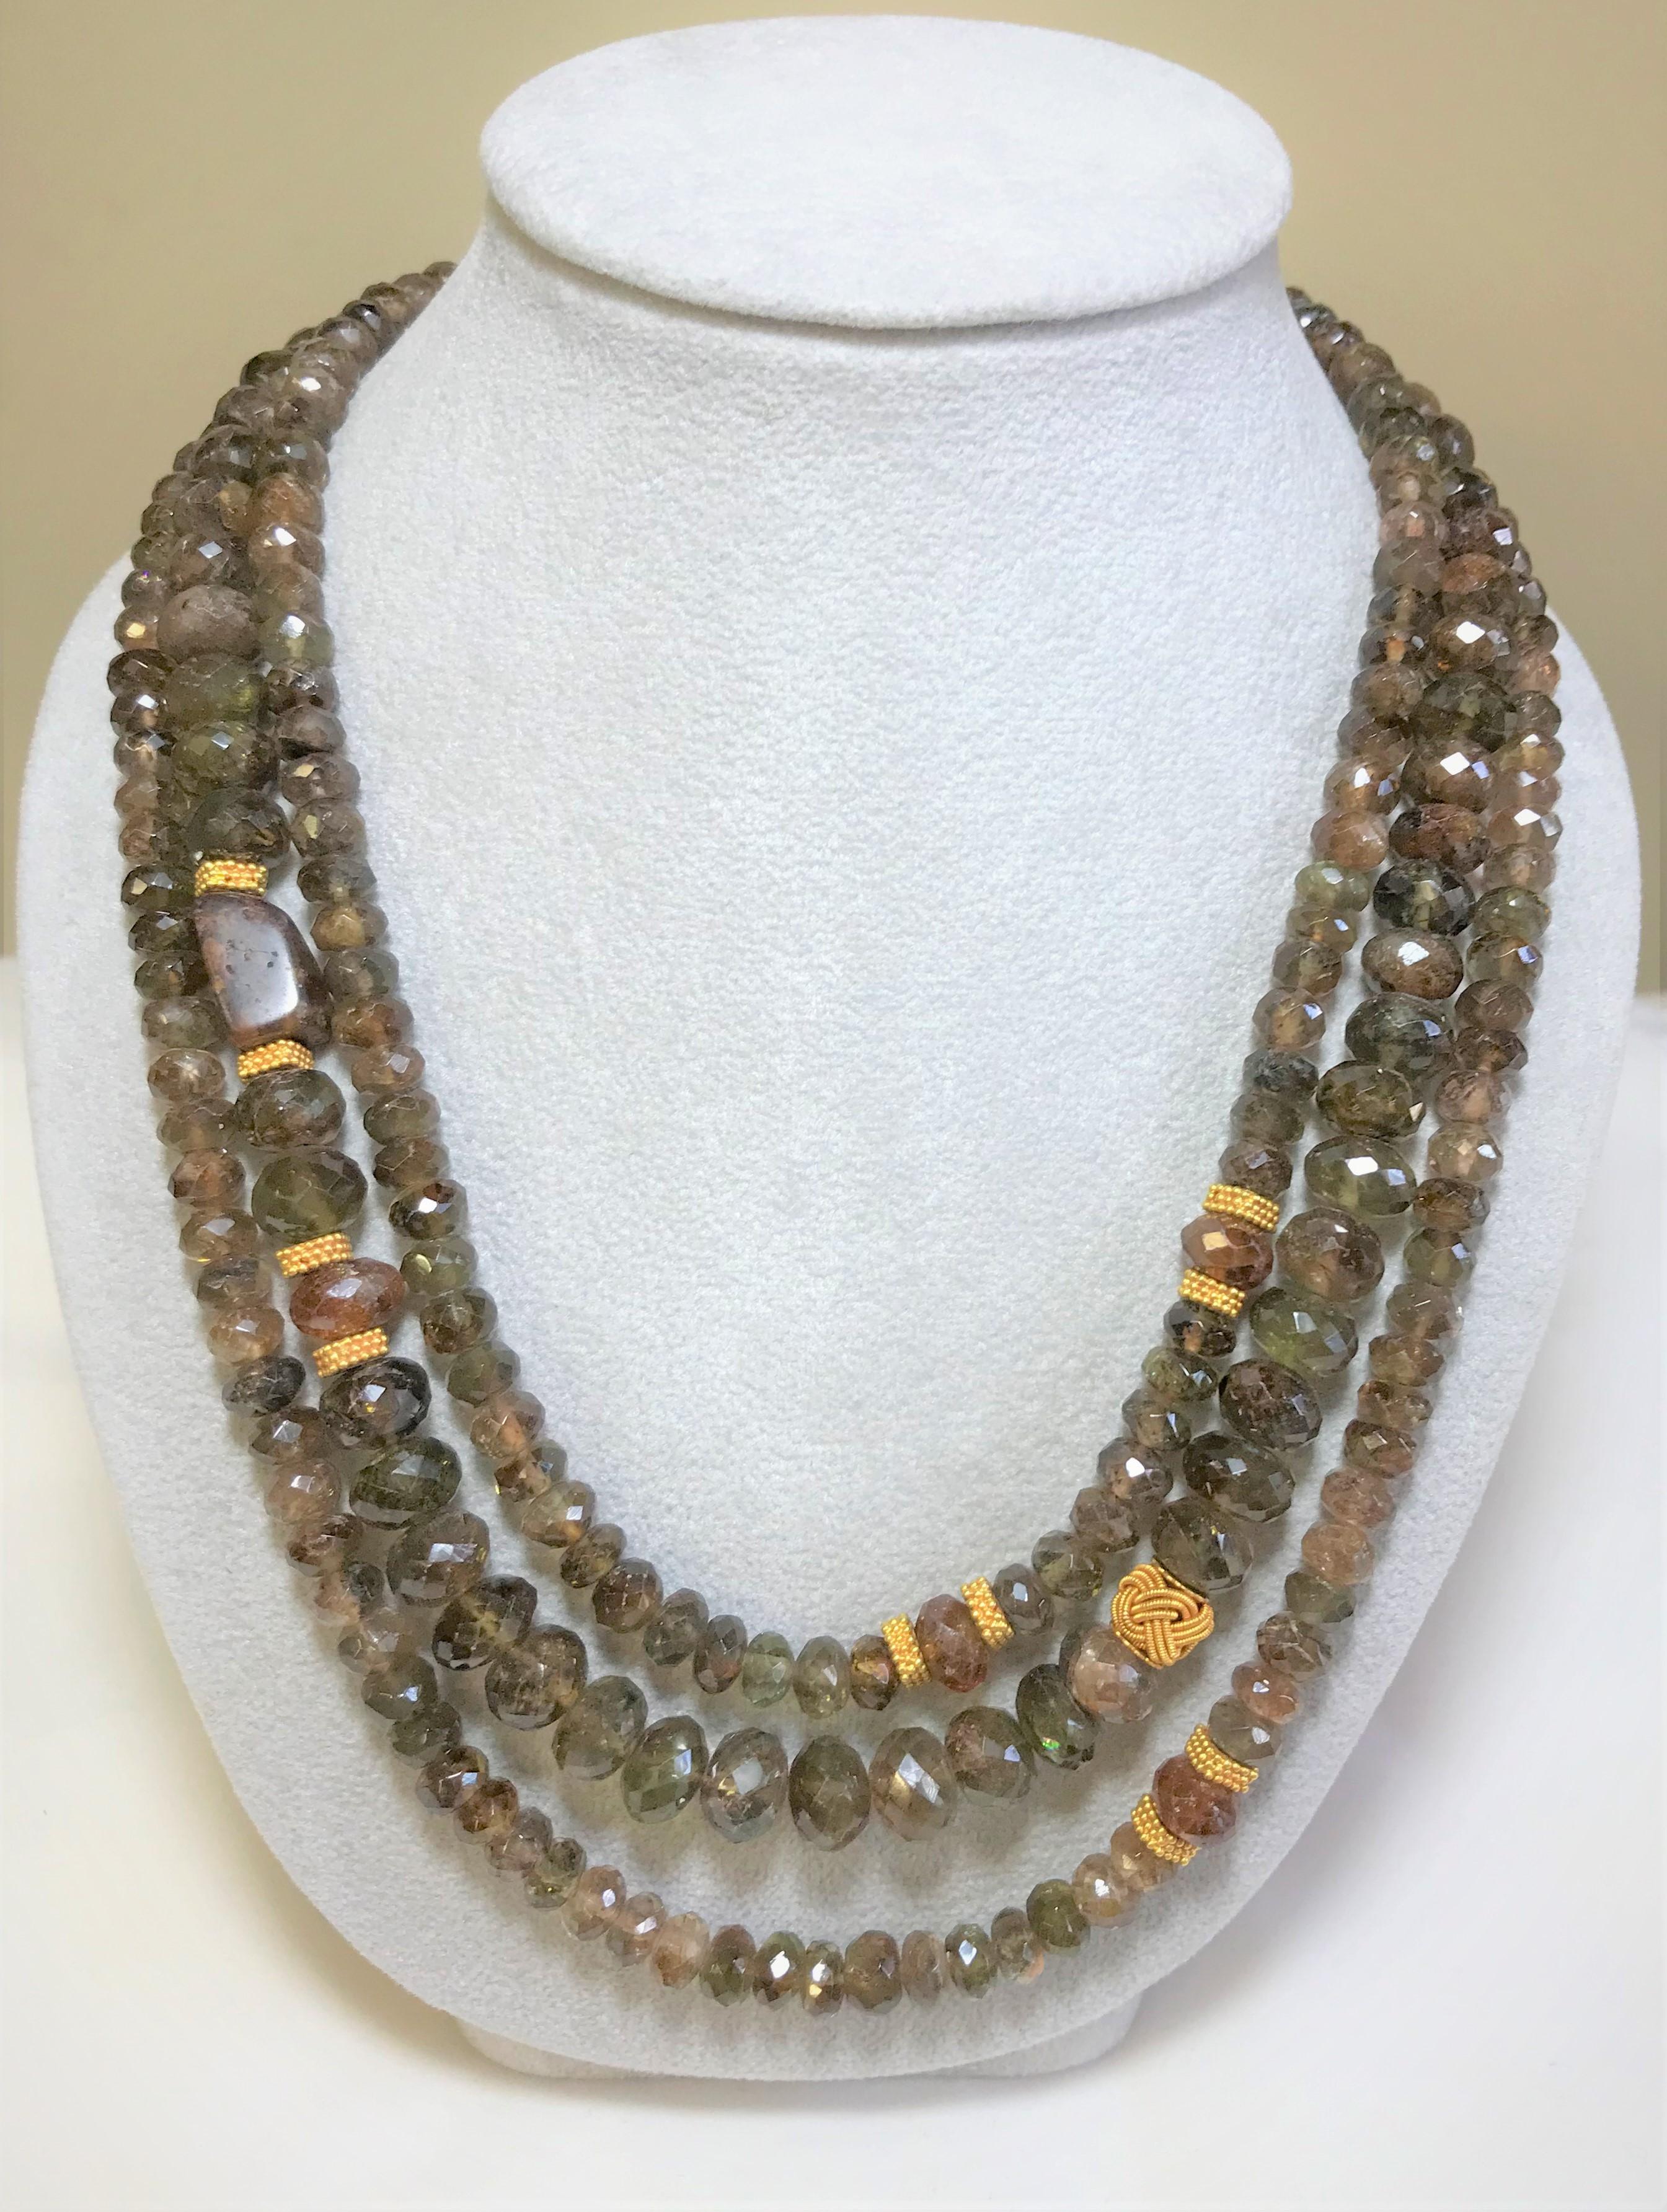 Original Laura Gibson
This three string warm brown beaded necklace is perfect for Fall!
22 karat yellow gold clasp and decorative rondells
Three strands
104 andalusite beads on the longest outer strand, each bead approximately 6mm wide
59 andalusite